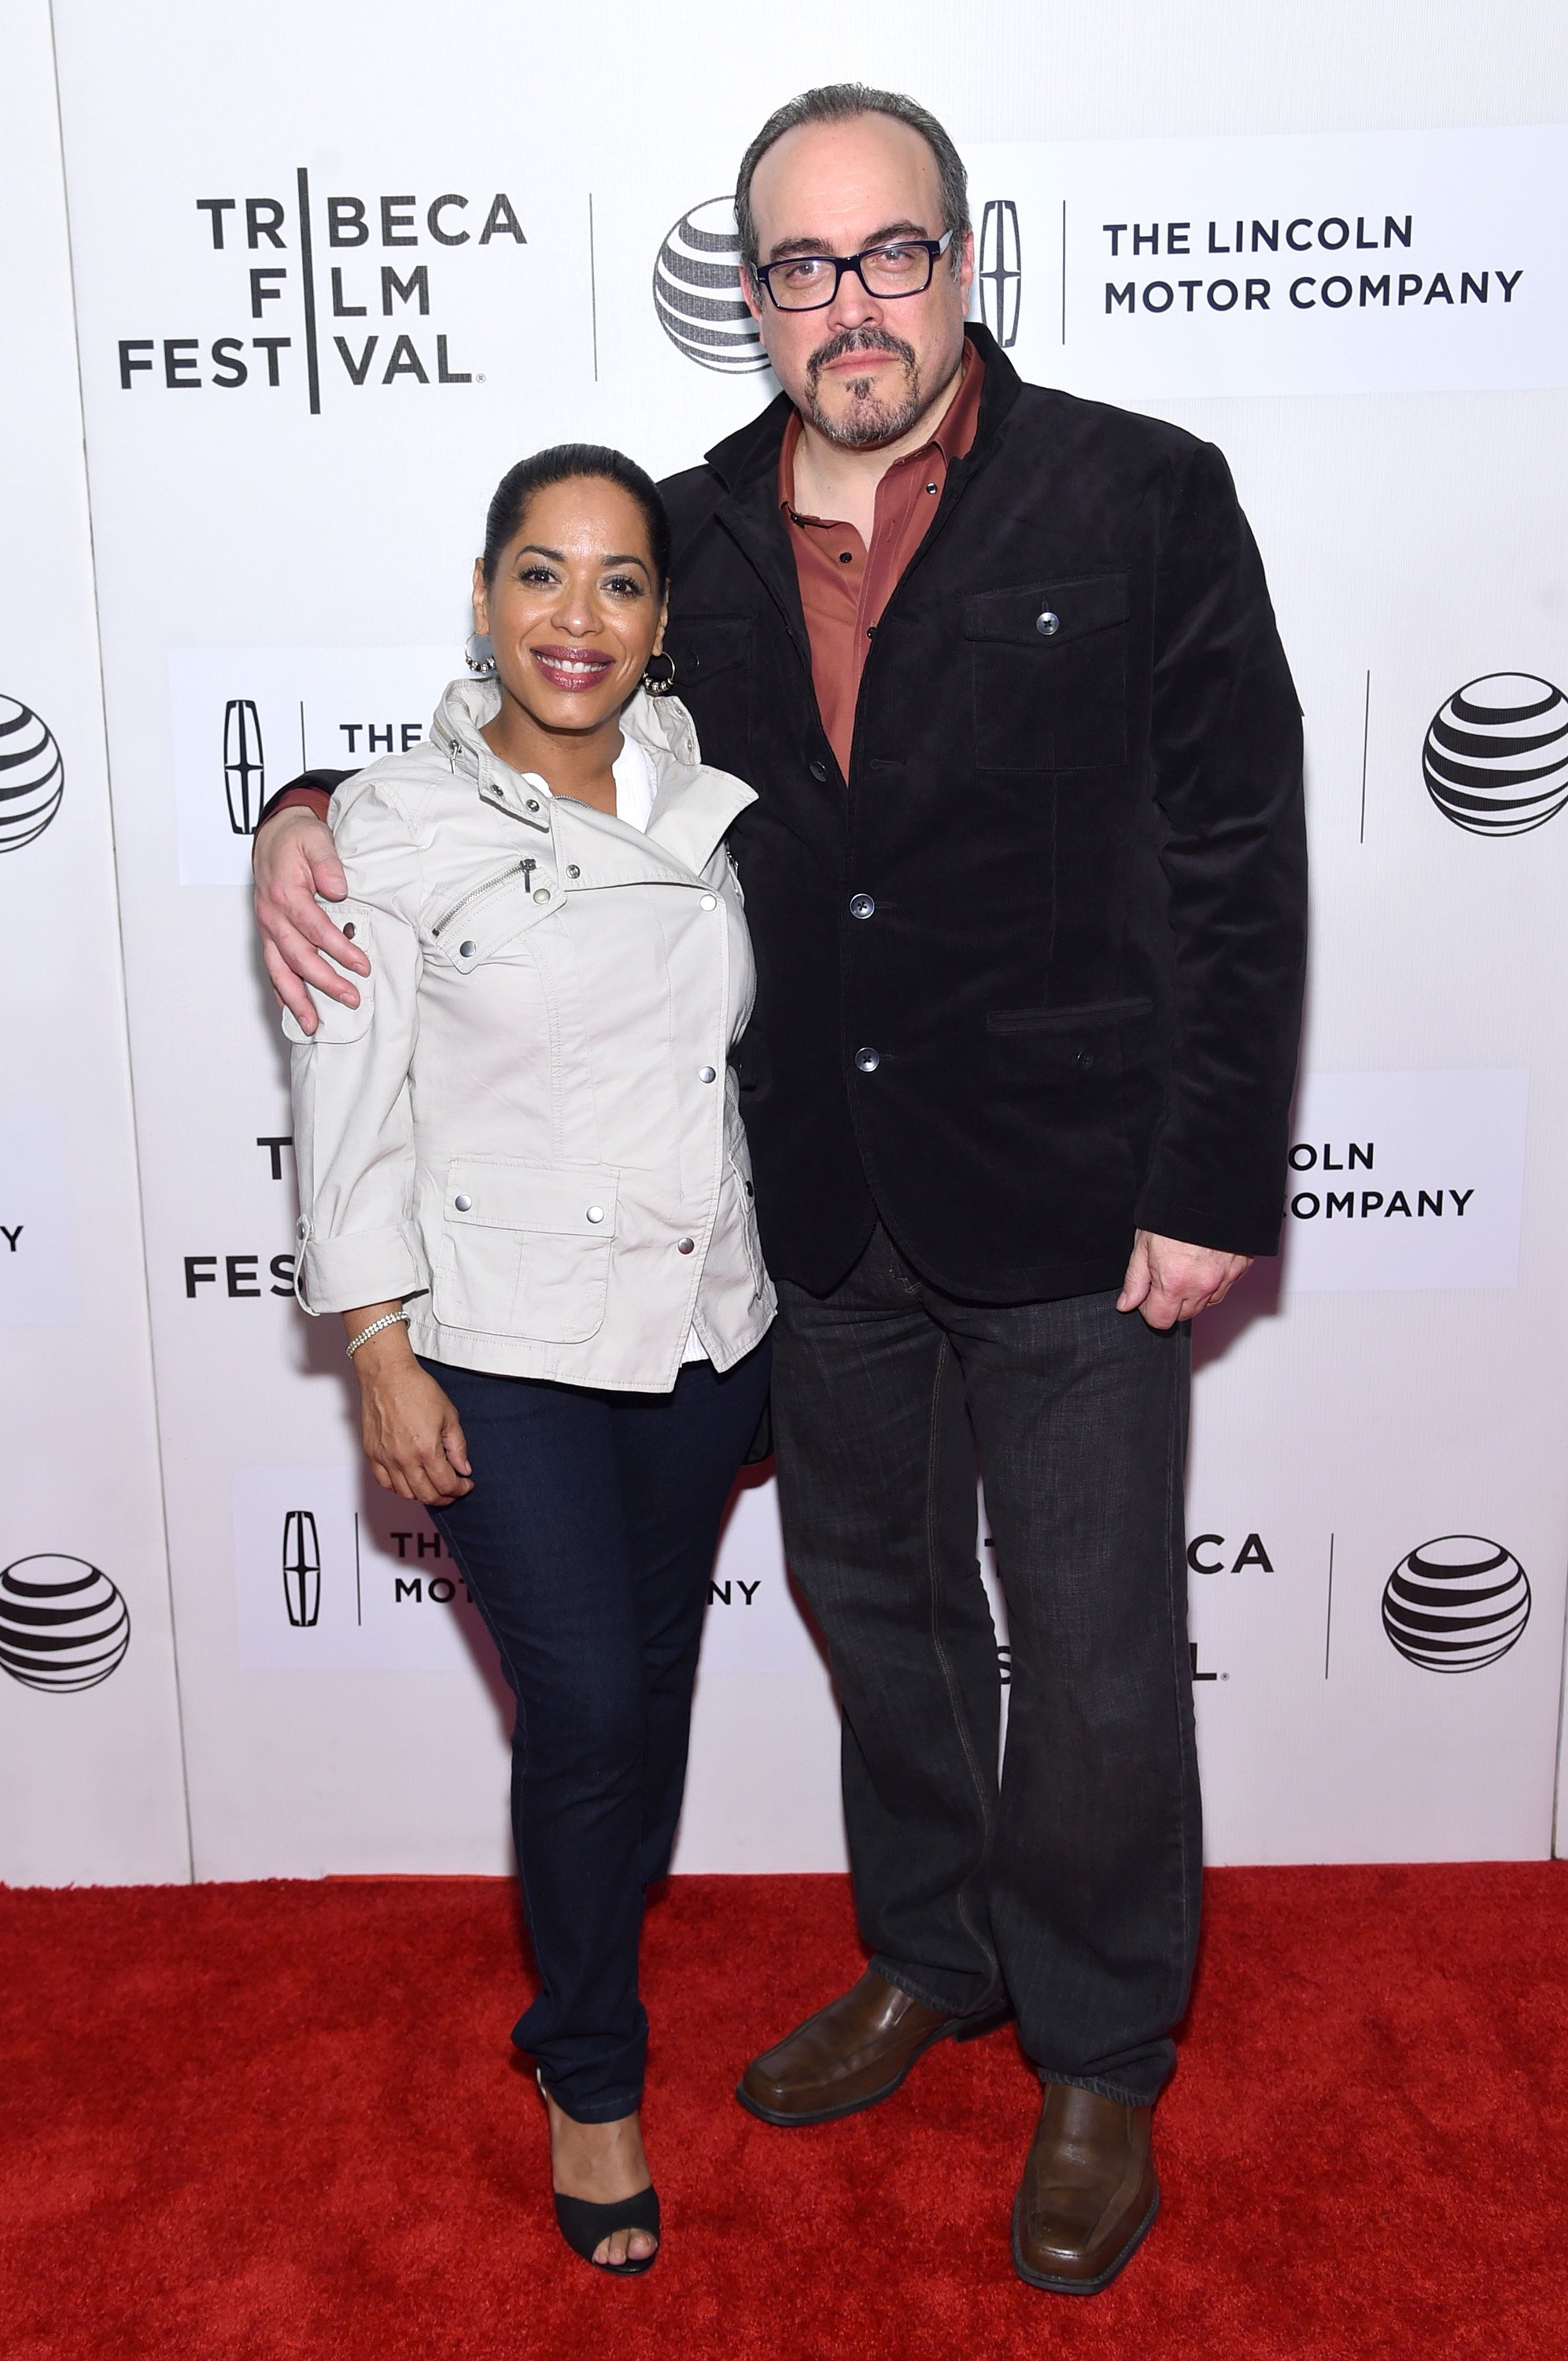 Liza Colón-Zayas and David Zayas attend the premiere of "The Wannabe" during the 2015 Tribeca Film Festival at BMCC Tribeca PAC on April 17, 2015, in New York City. | Source: Getty Images.